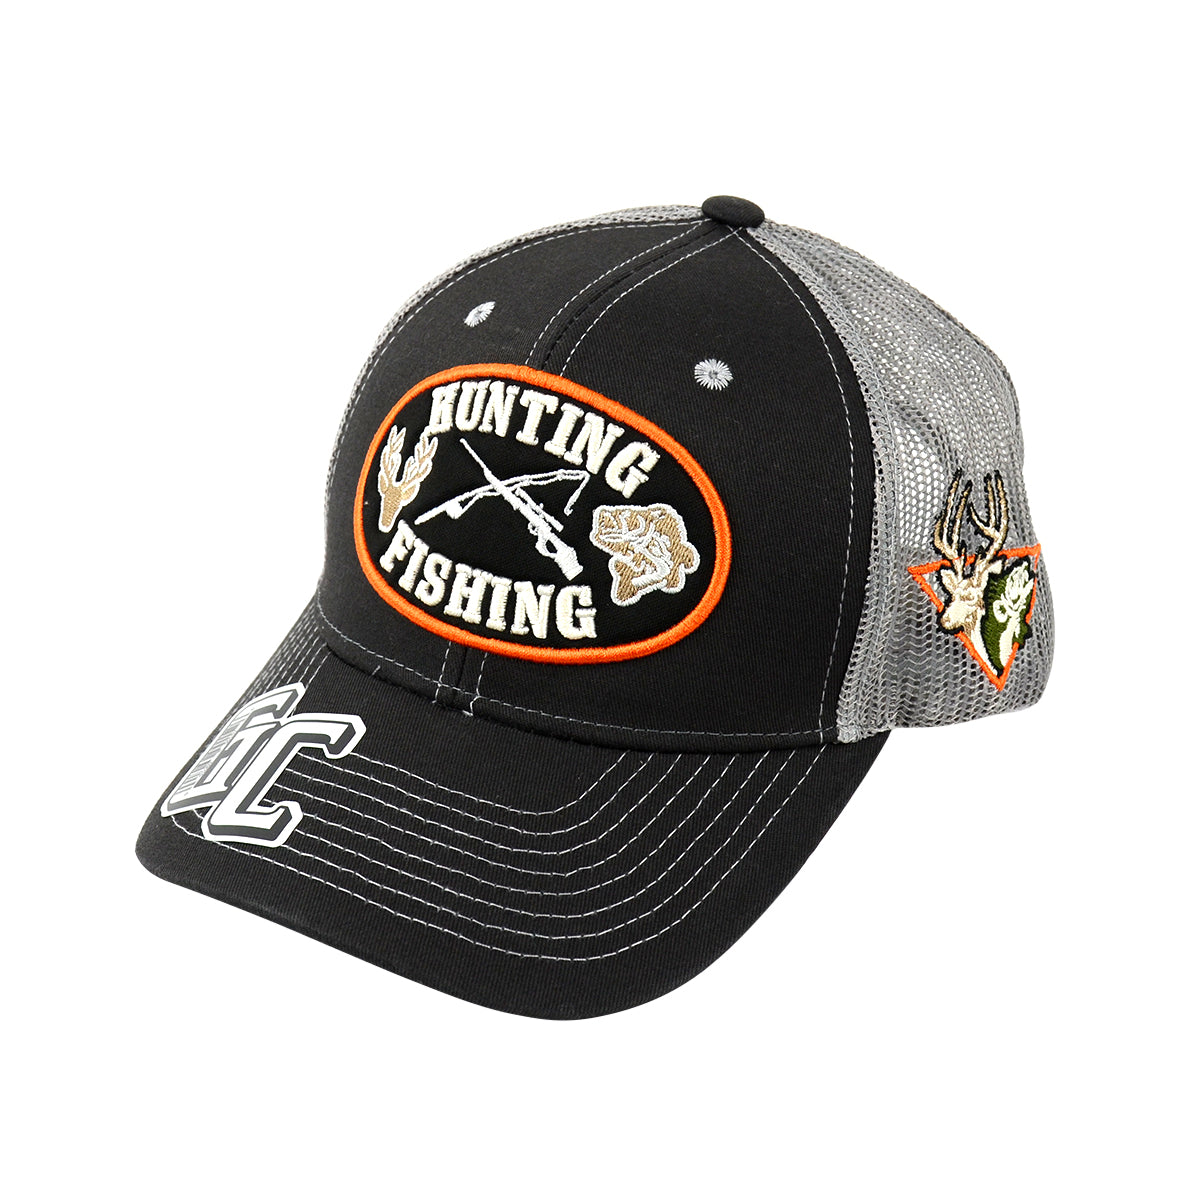 Snapback "Hunting Fishing" Hat Net Back Embroidered